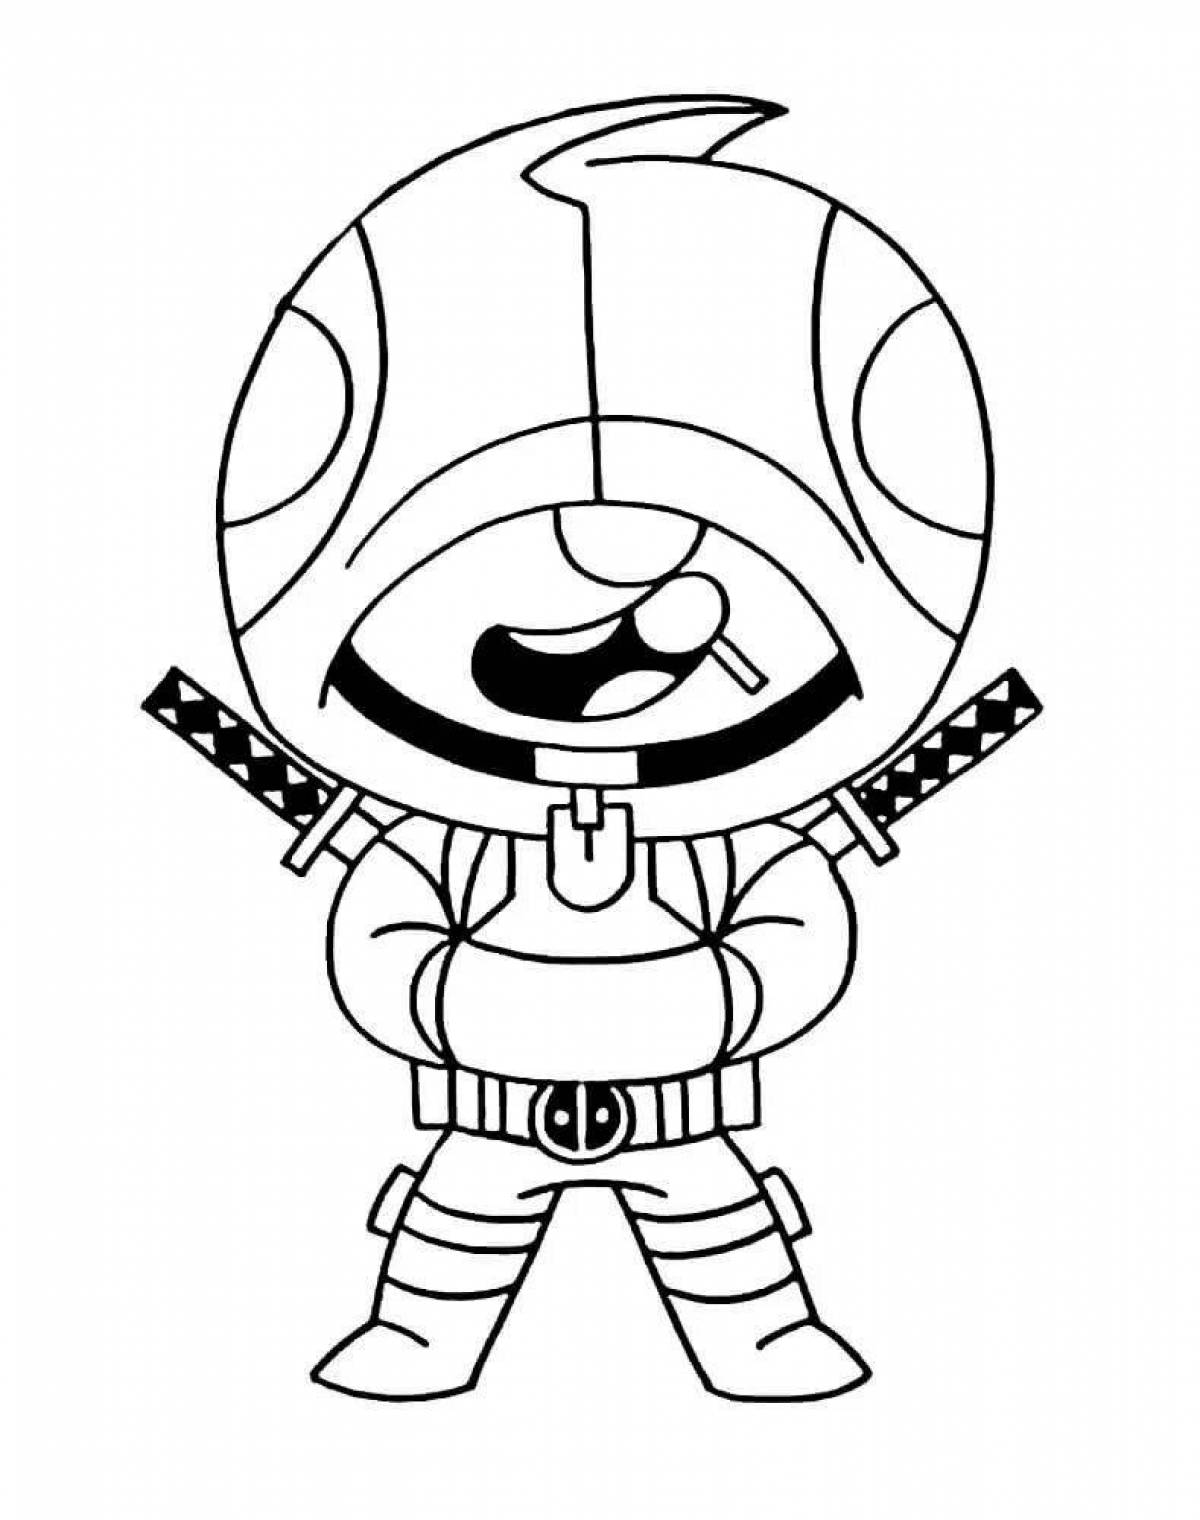 Lovely griff brawl stars coloring page